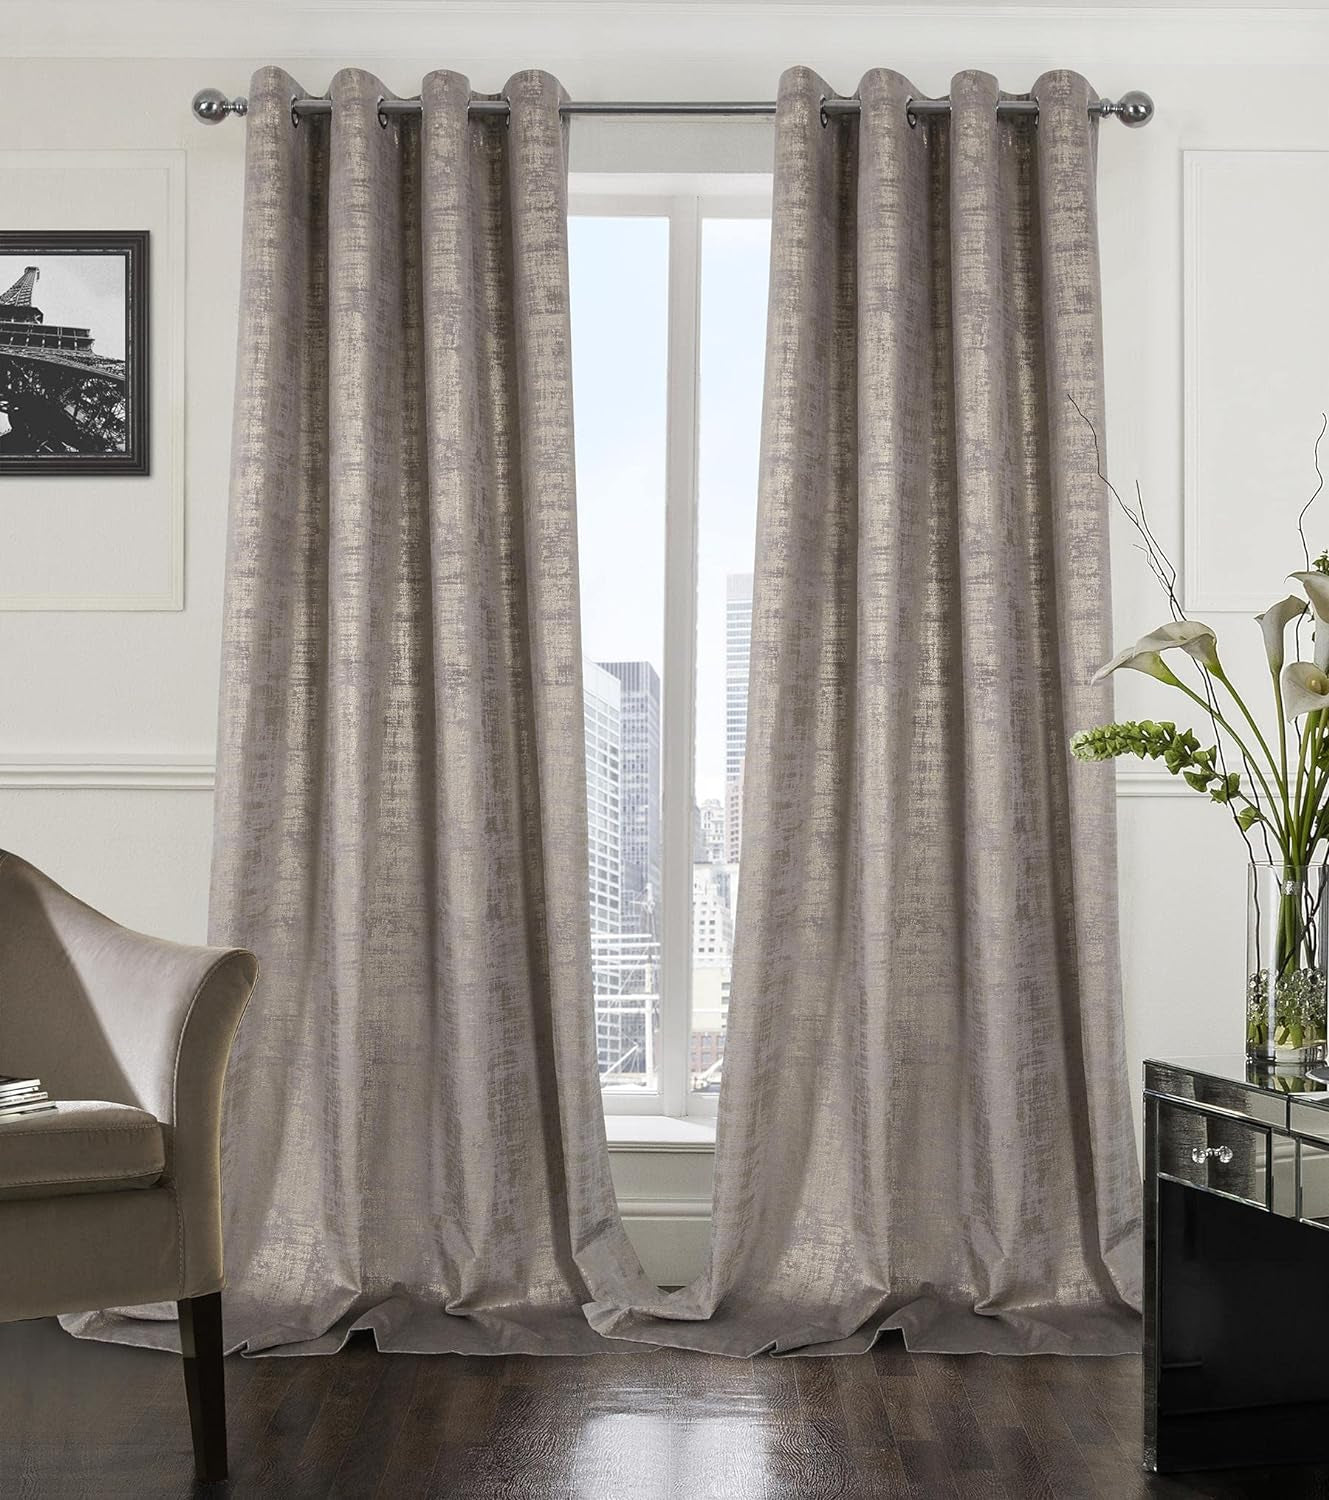 Always4U Soft Velvet Curtains 95 Inch Length Luxury Bedroom Curtains Gold Foil Print Window Curtains for Living Room 1 Panel White  always4u Champagne (Gold Print) 2 Panels: 52''W*120''L 